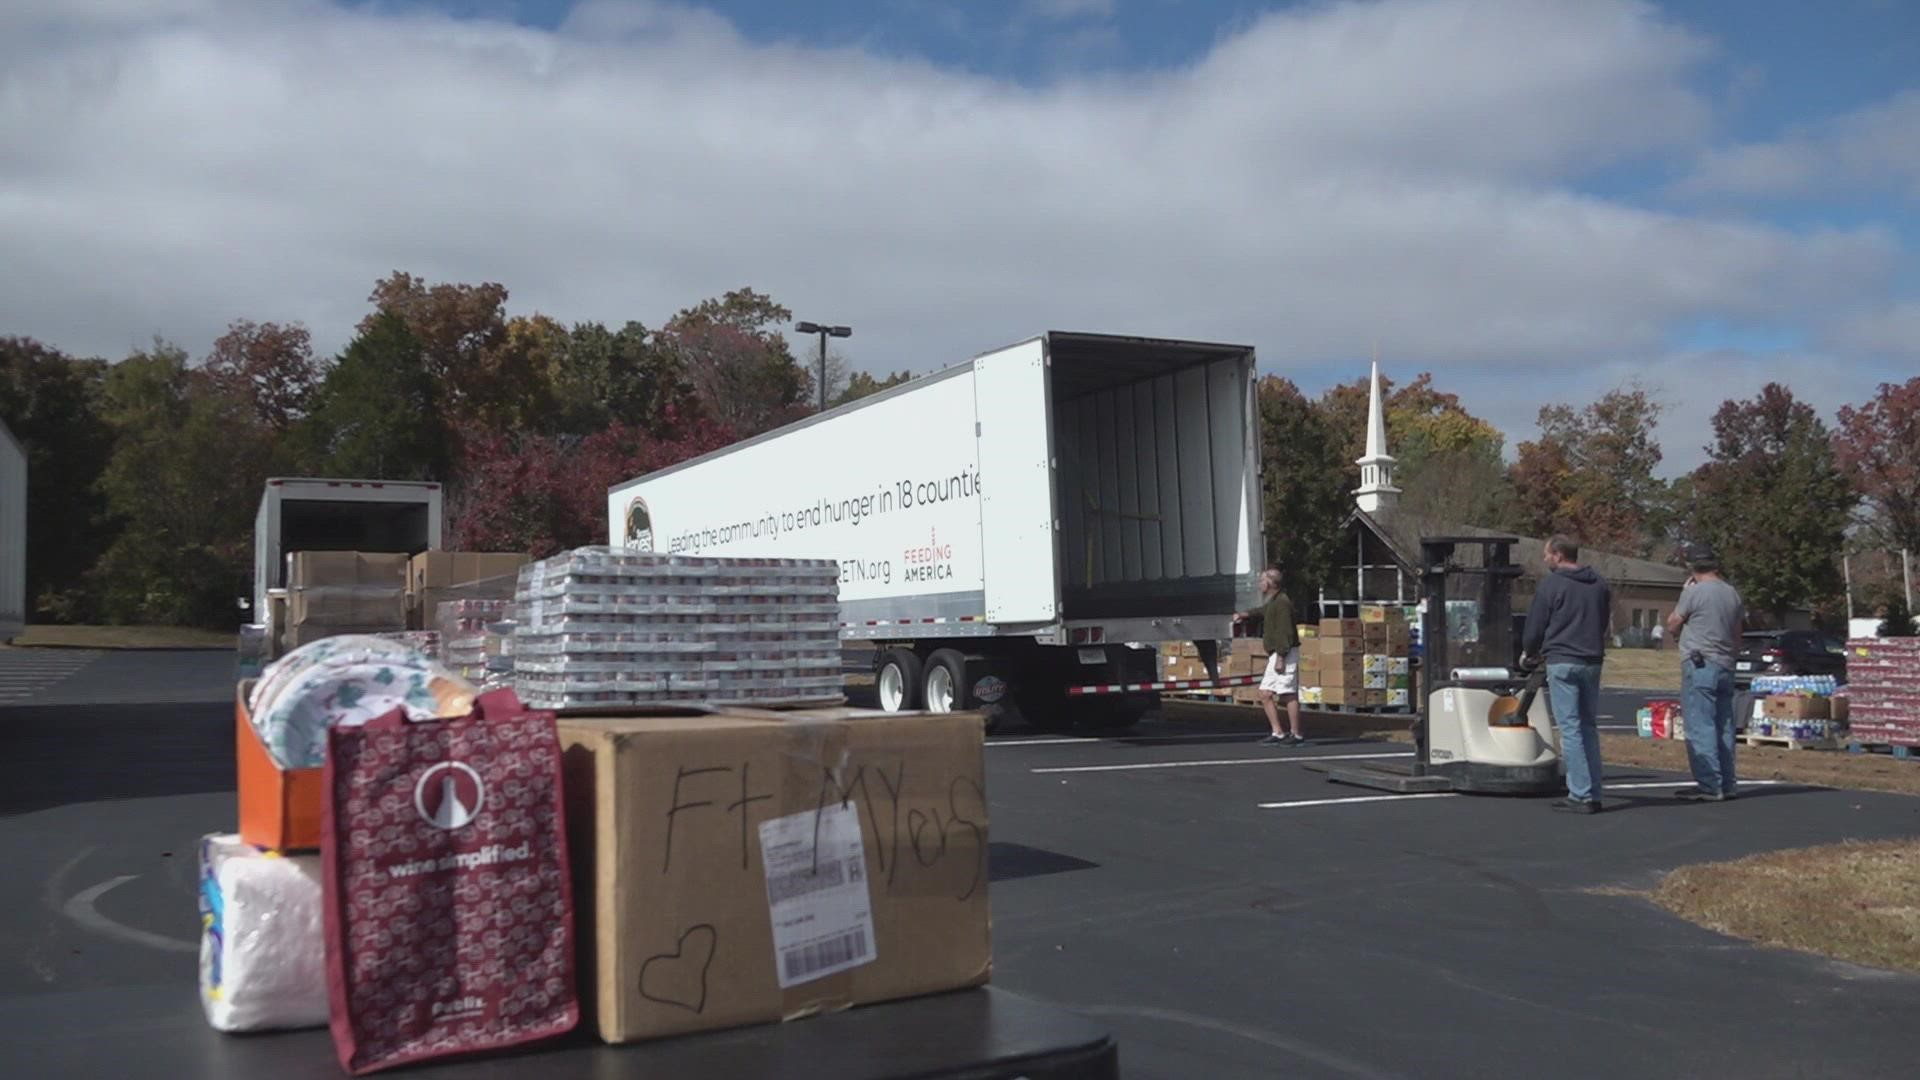 Local organizations, like Compassion Ministries and Second Harvest Food Bank, are coming together to support those affected by Hurricane Ian in Florida.